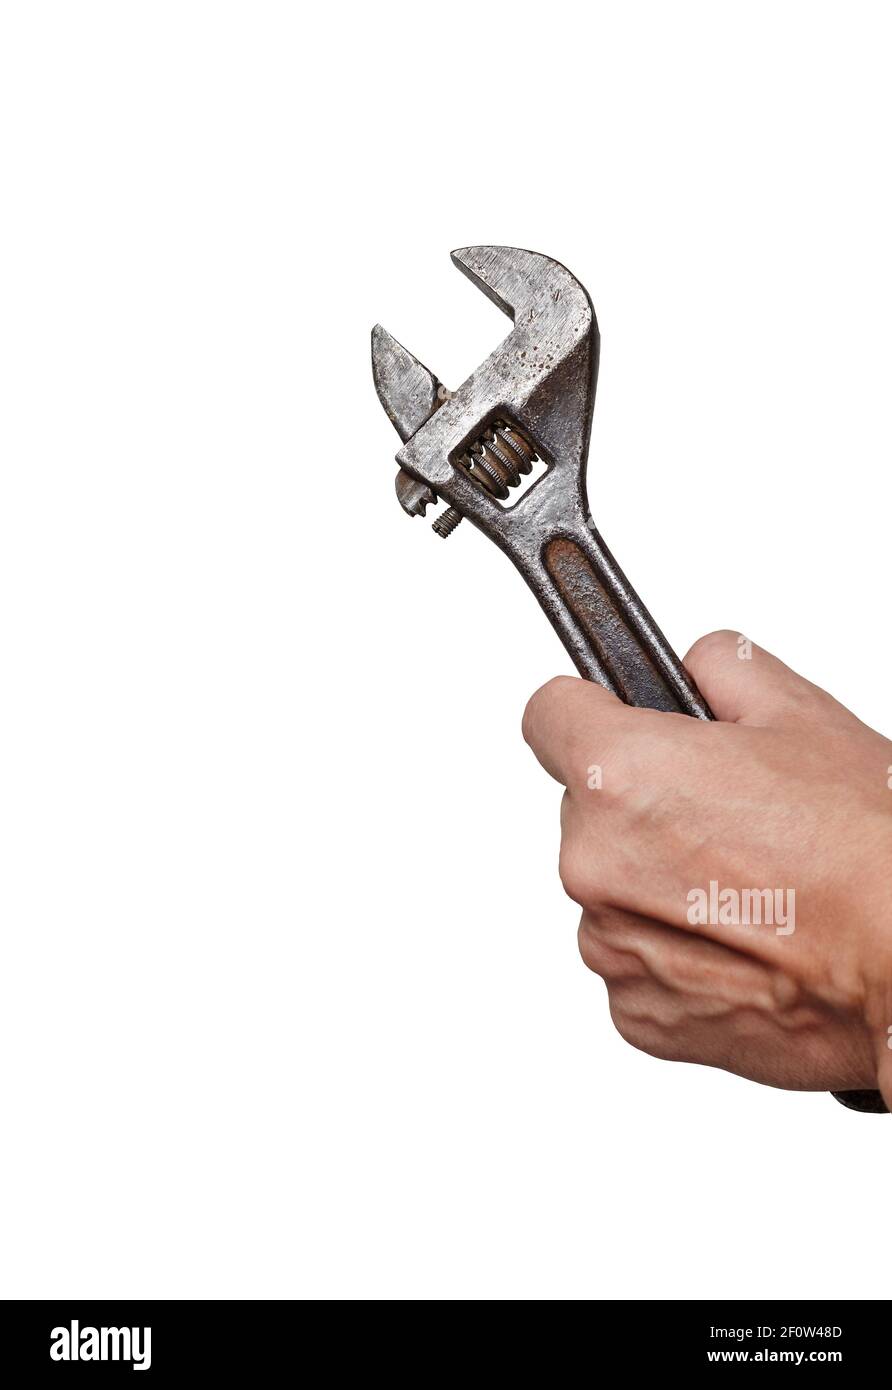 Human hand with adjustable wrench isolated on white background with clipping path. Copy space, no shadows Stock Photo